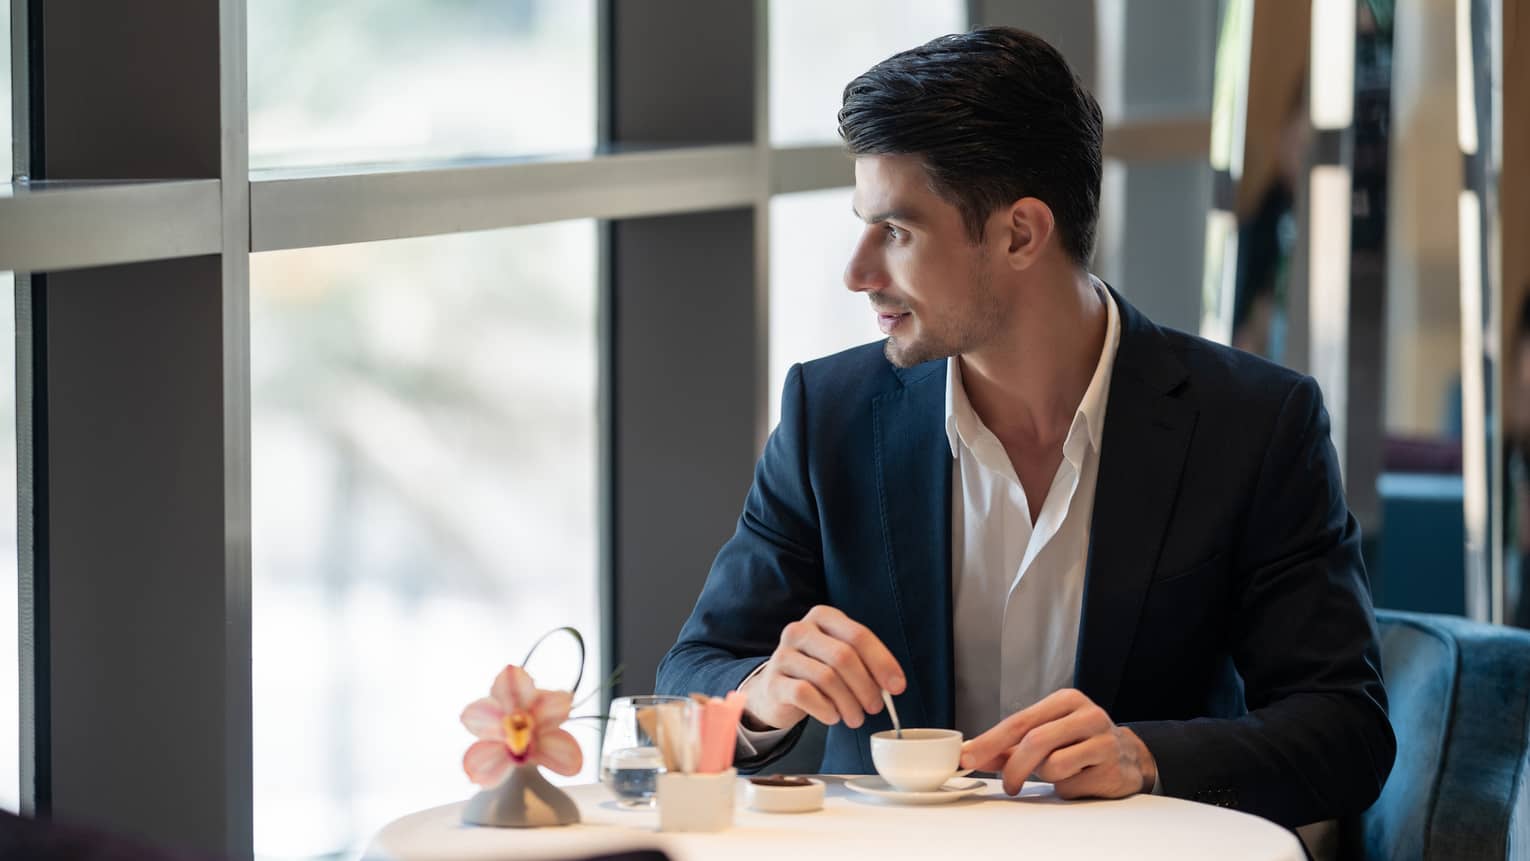 Man wearing black suit and white collared shirt with no tie sits at a table stirring a cup of esspresso while looking out the window